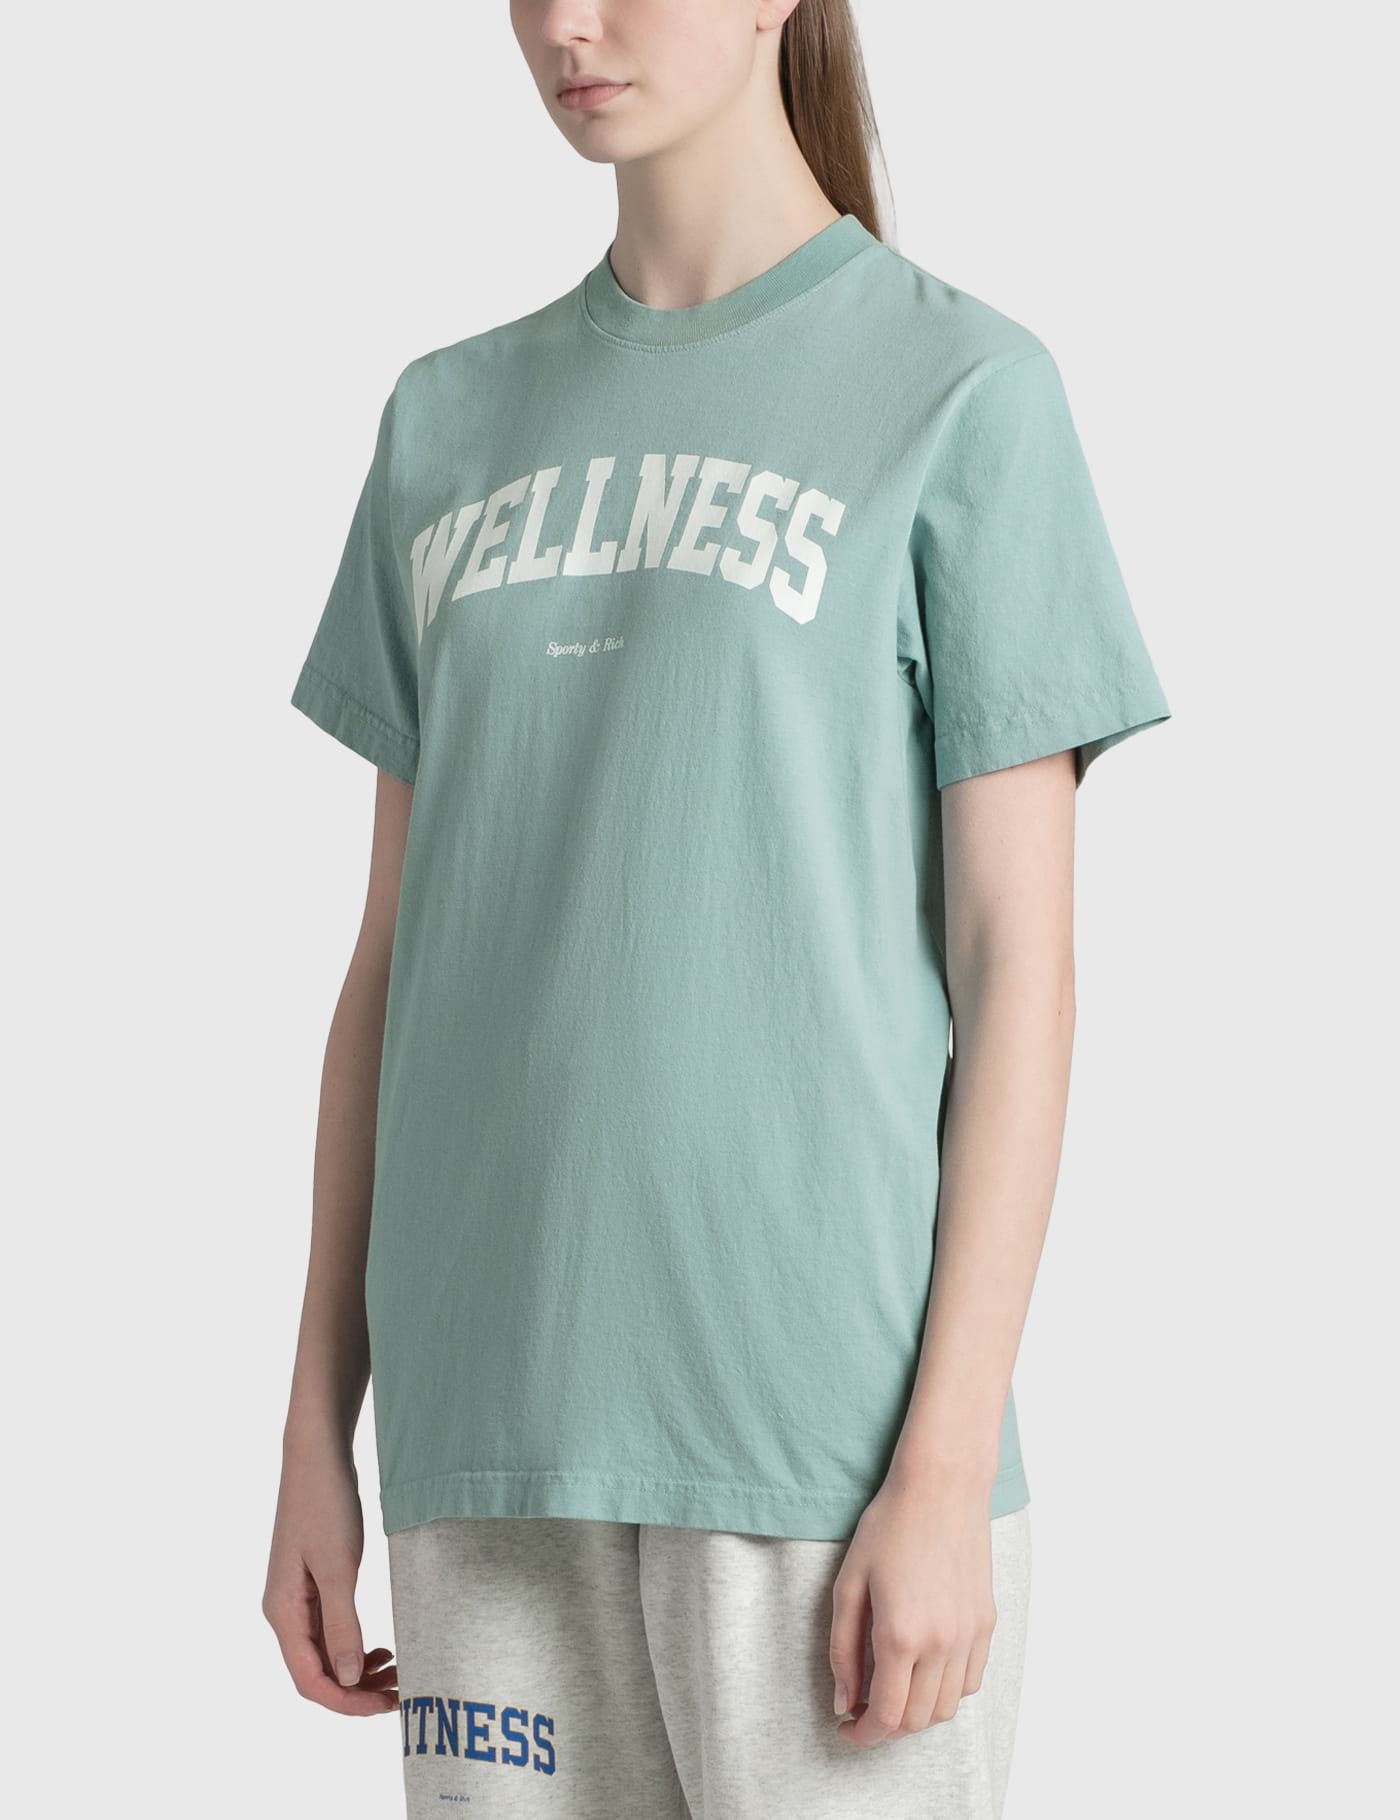 Sporty & Rich - Wellness Ivy T-shirt | HBX - Globally Curated 